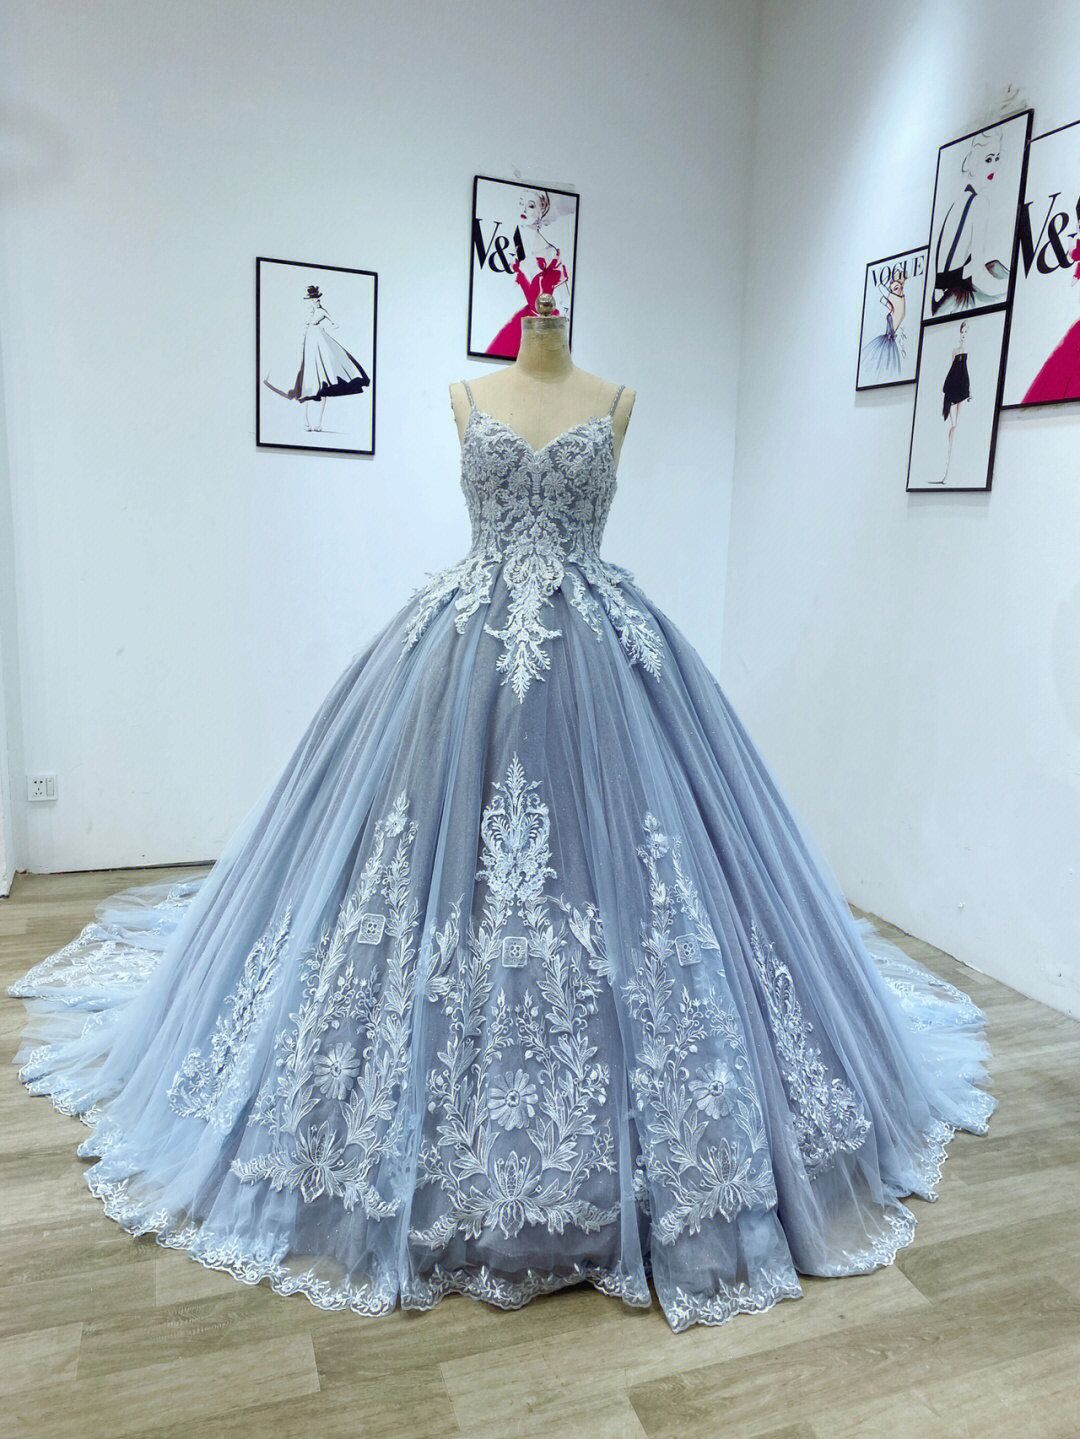 Dusty Blue Lace Ball Gown Puffy Quinceanera Dress - DollyGown